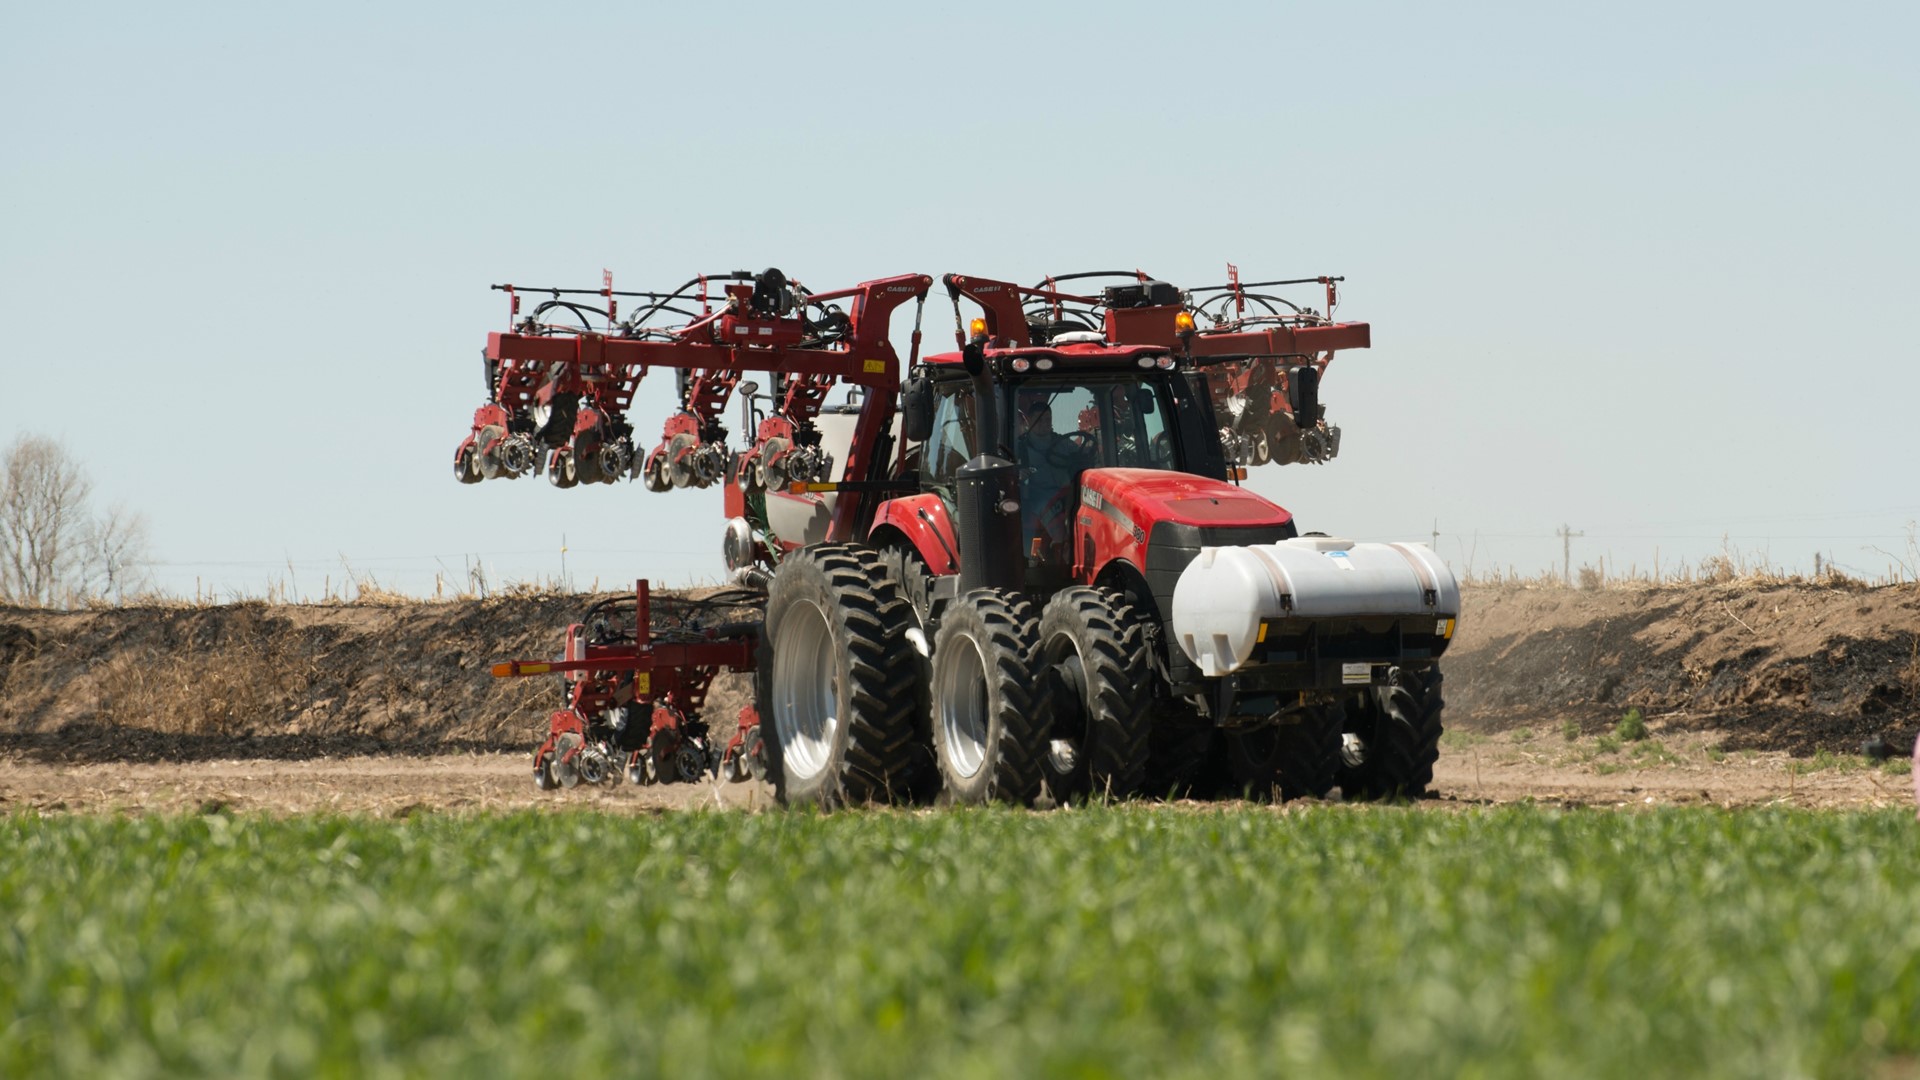 The 2130 Early Riser stack-fold planter is customizable to meet the needs of specialty operations.